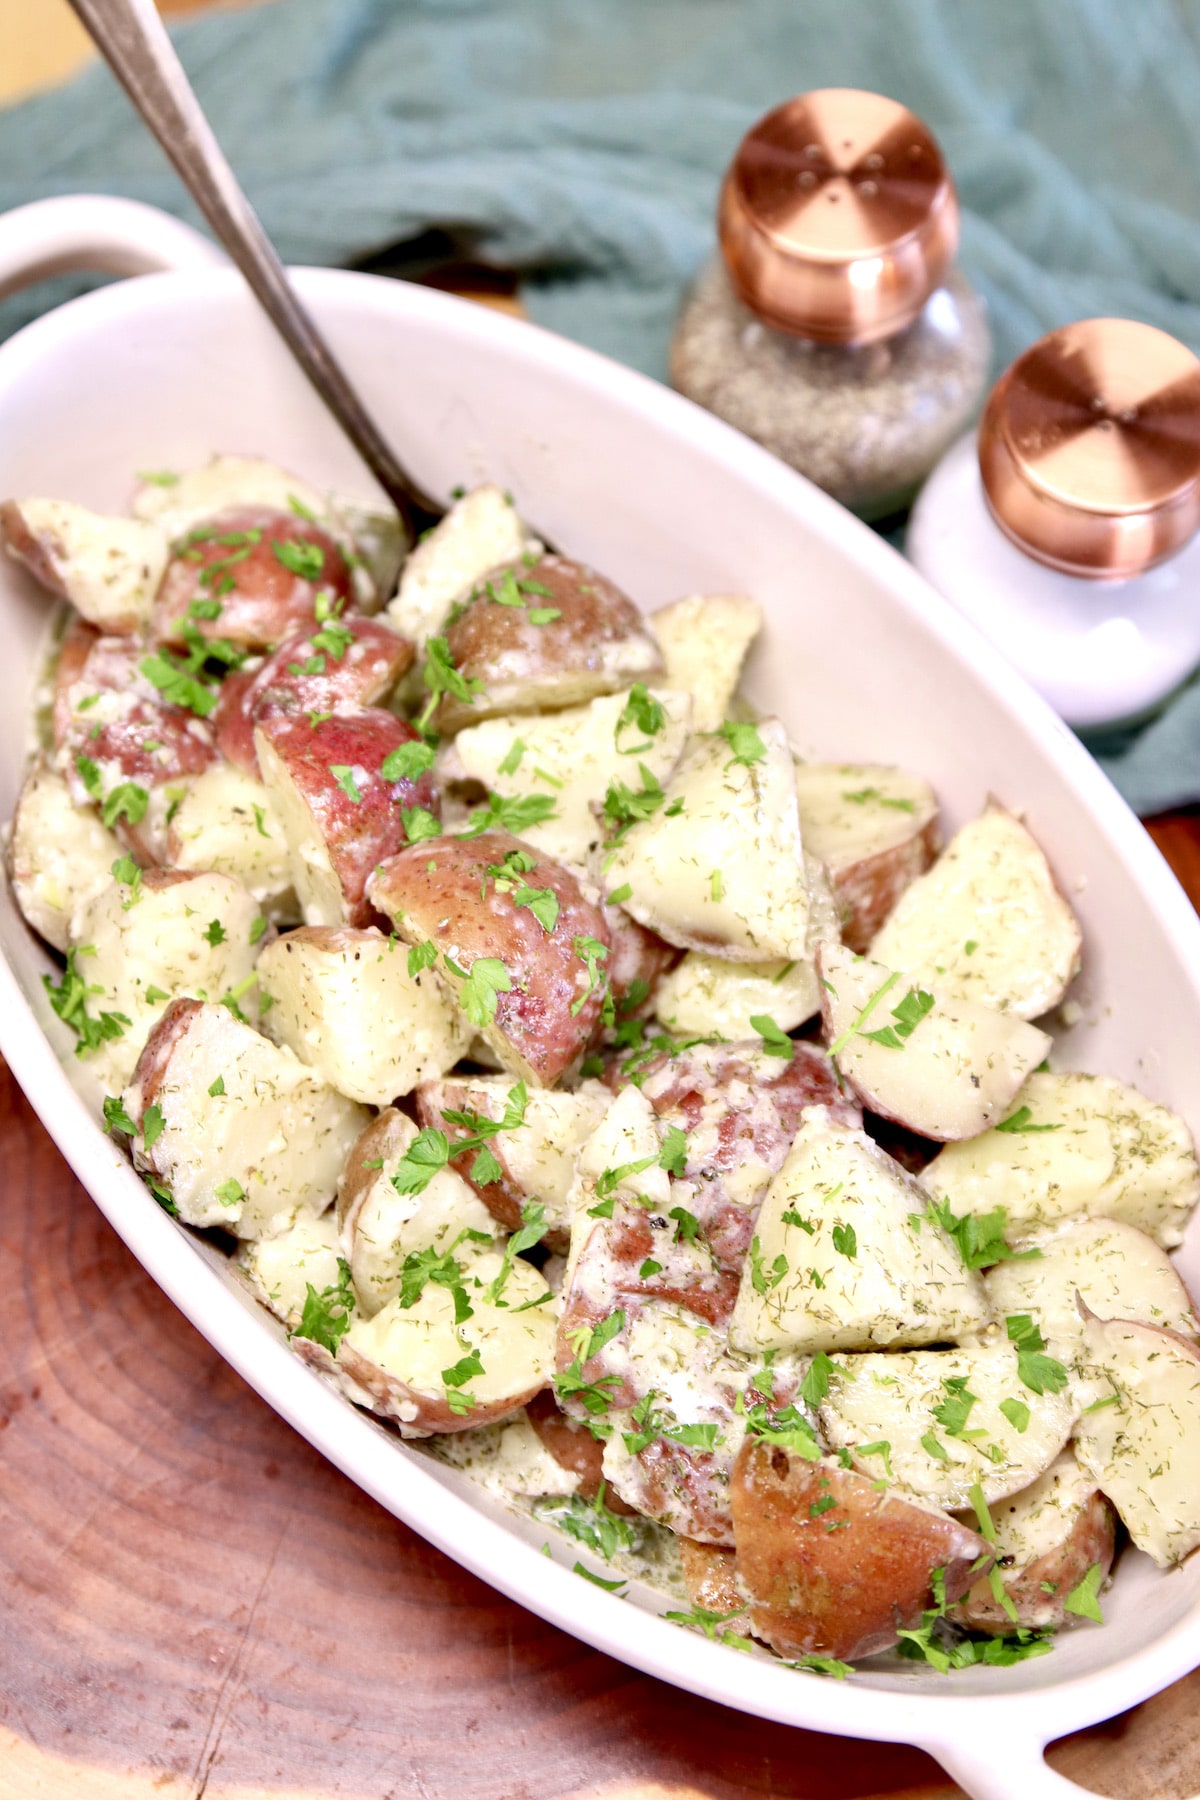 Dish of red potatoes with garlic and dill.